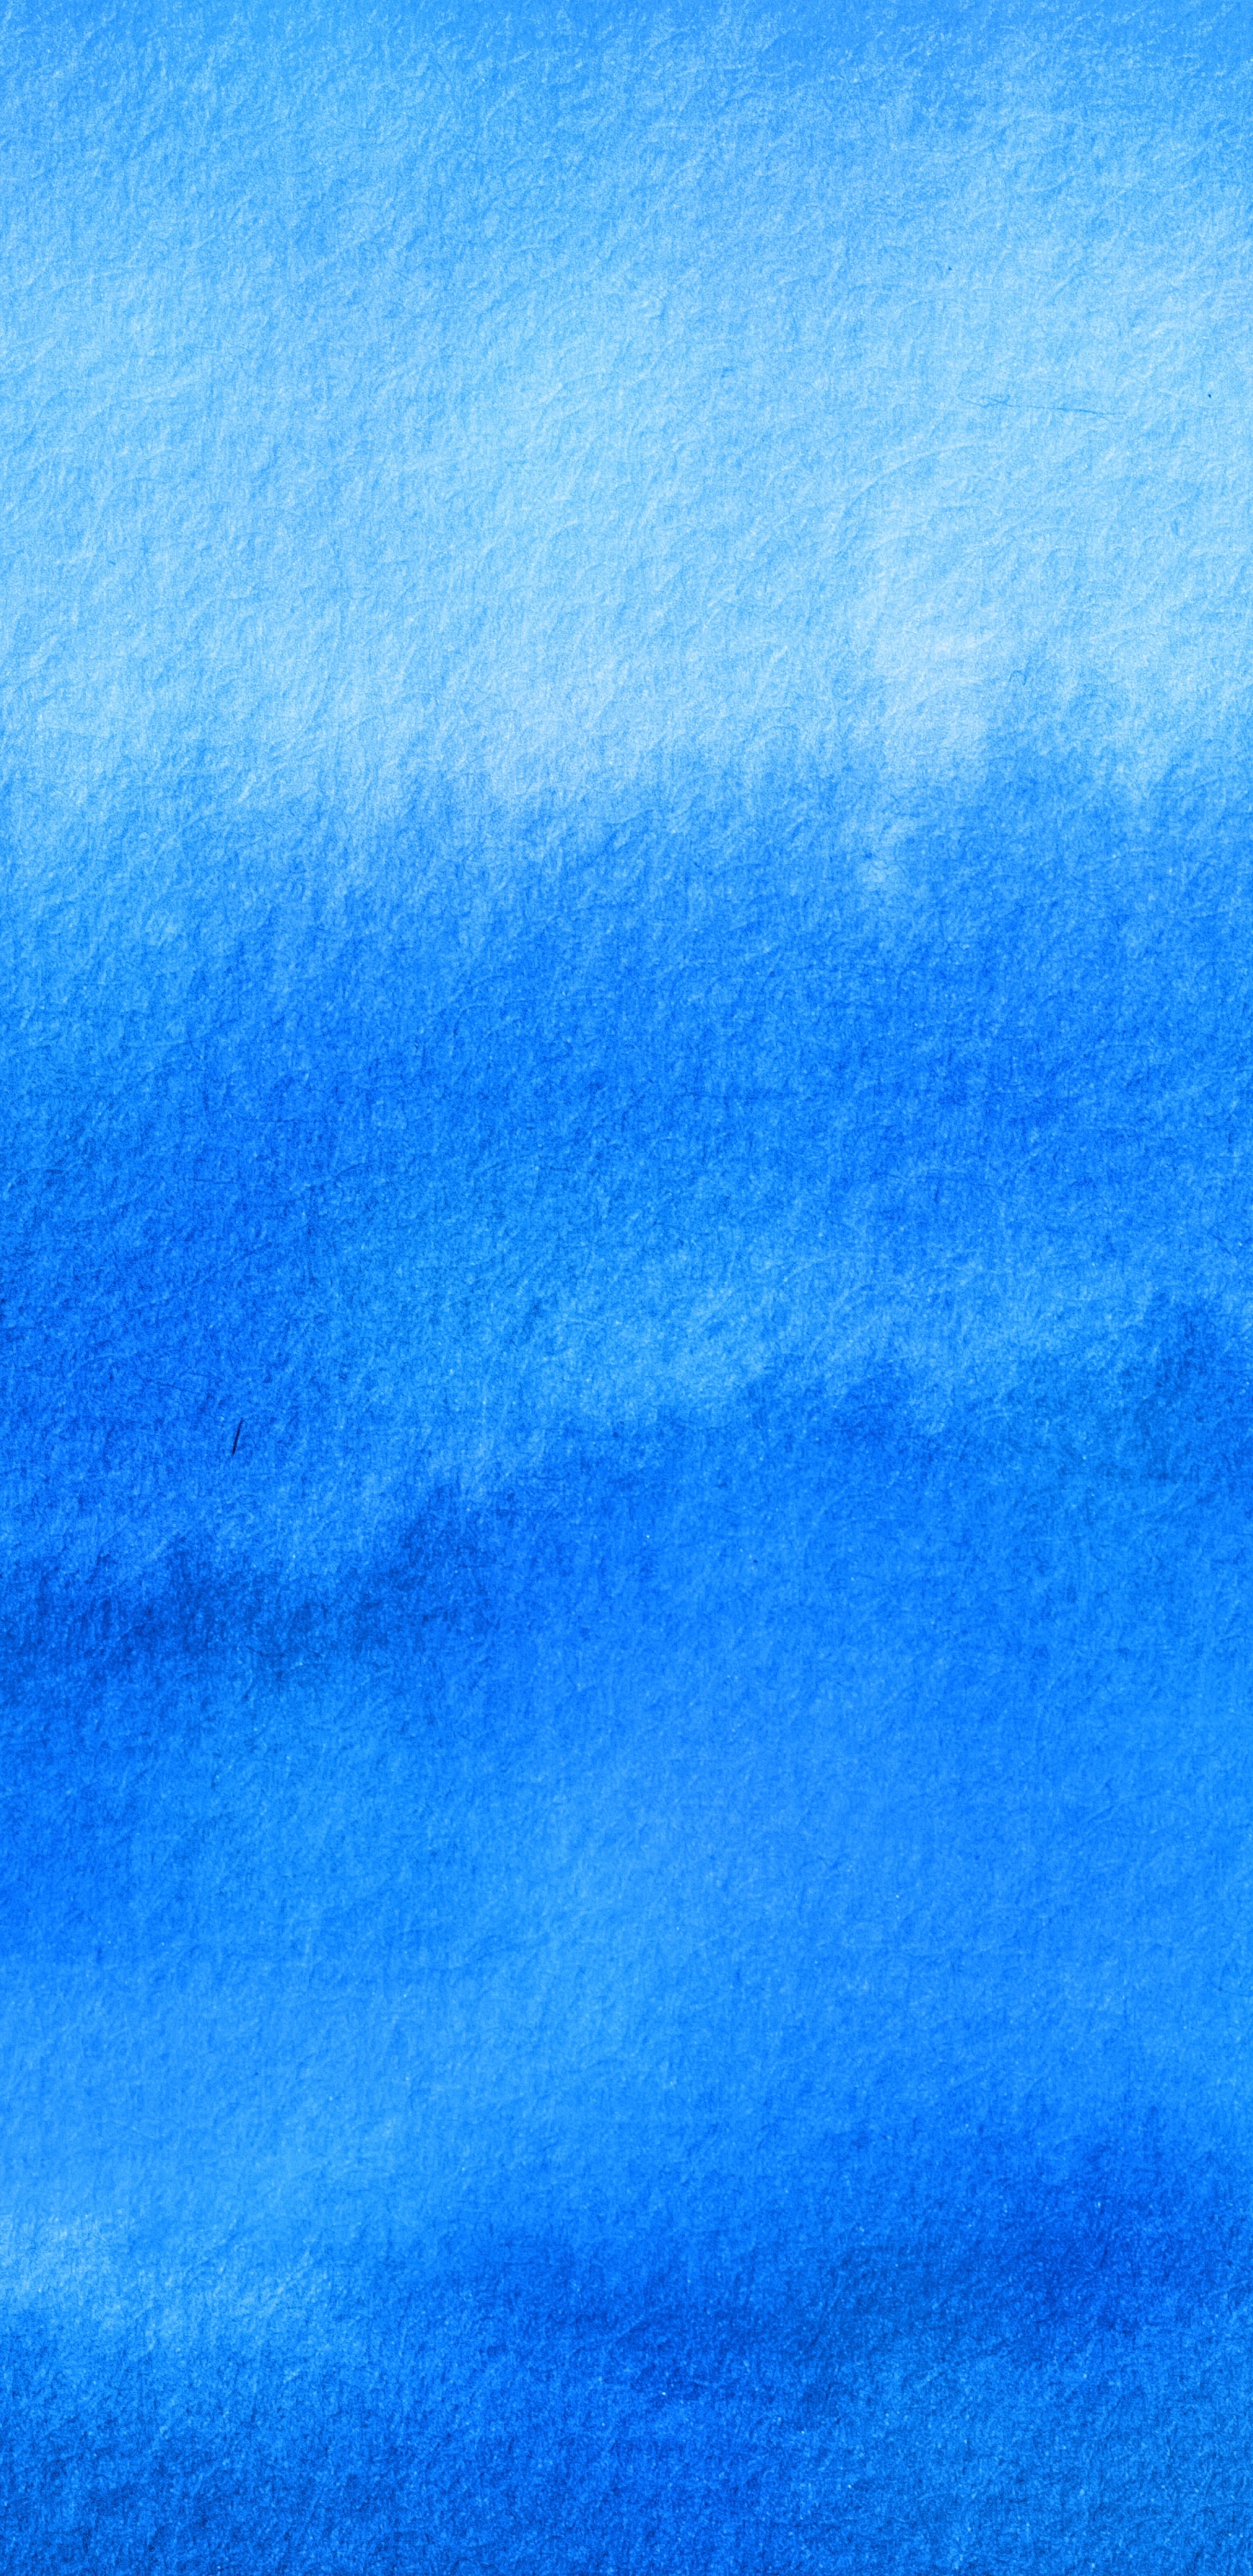 Blue and White Clouds During Daytime. Wallpaper in 1440x2960 Resolution